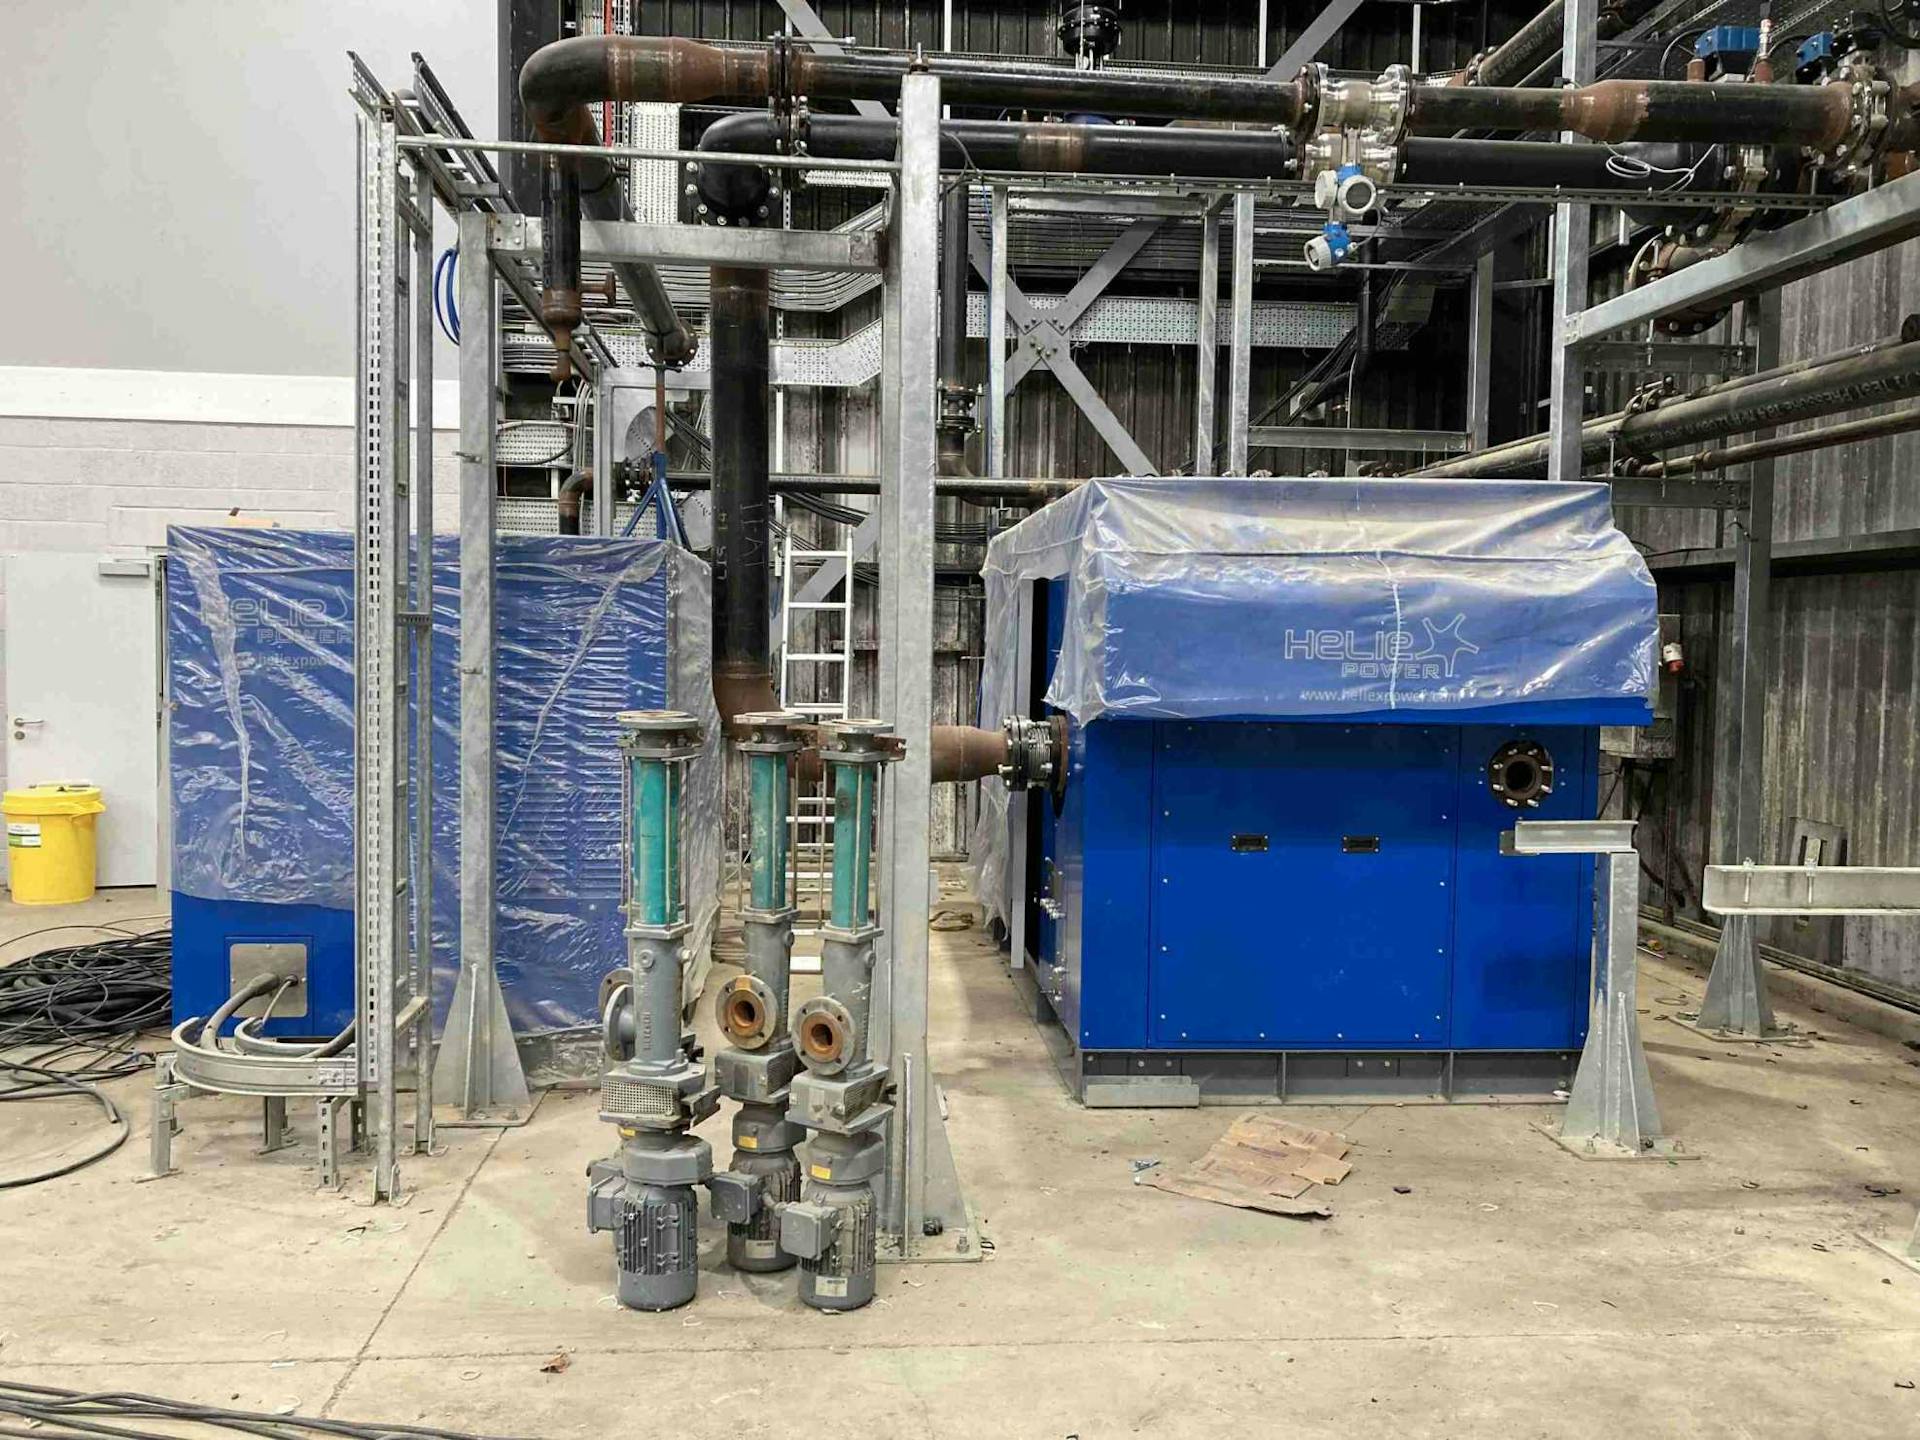 Heliex GenSet 9Photo of 2x Heliex steam expander generator set showing exterior view - zero hours used orc for sale